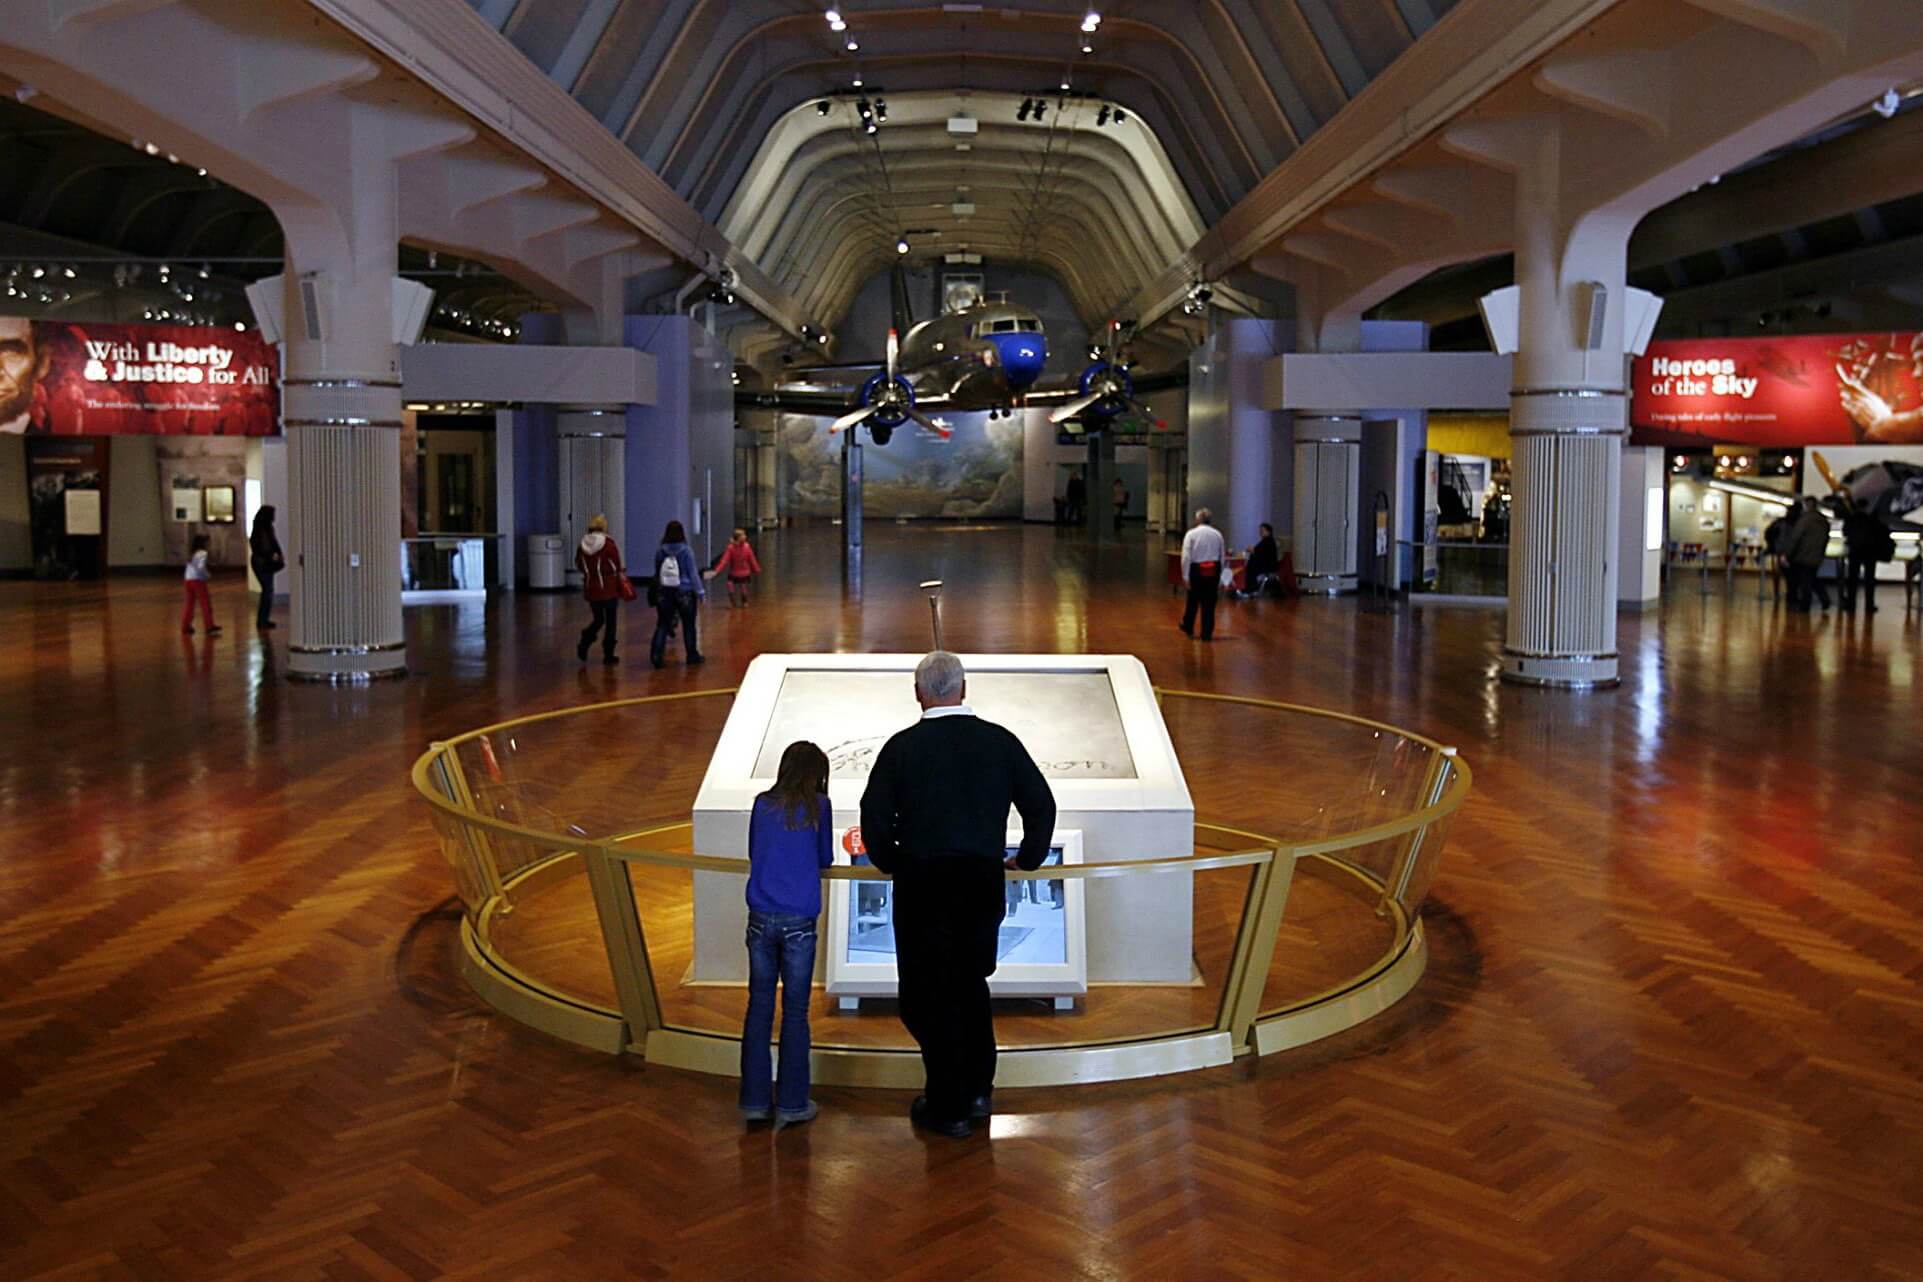 The Henry Ford Becomes A ‘Museum For All’